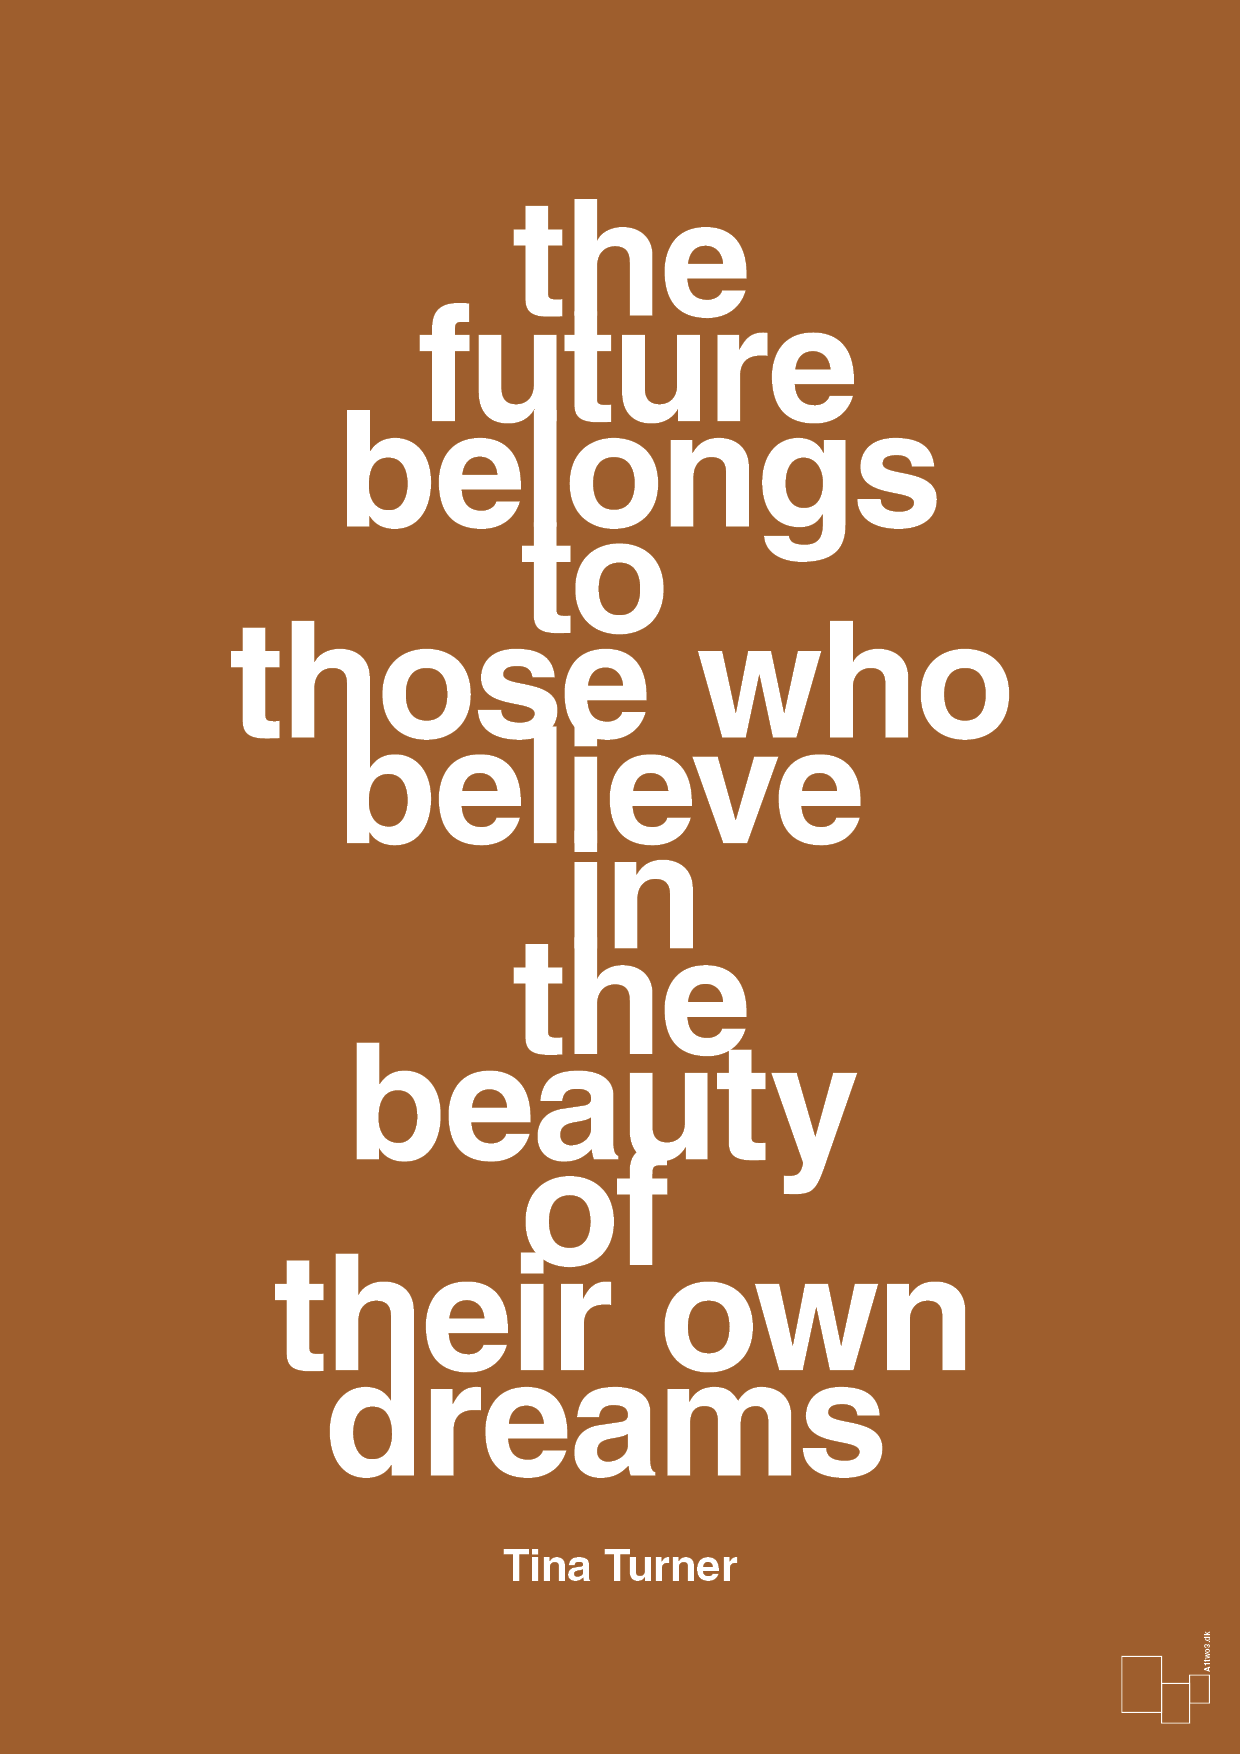 the future belongs to those who believe in the beauty of their own dreams - Plakat med Citater i Cognac